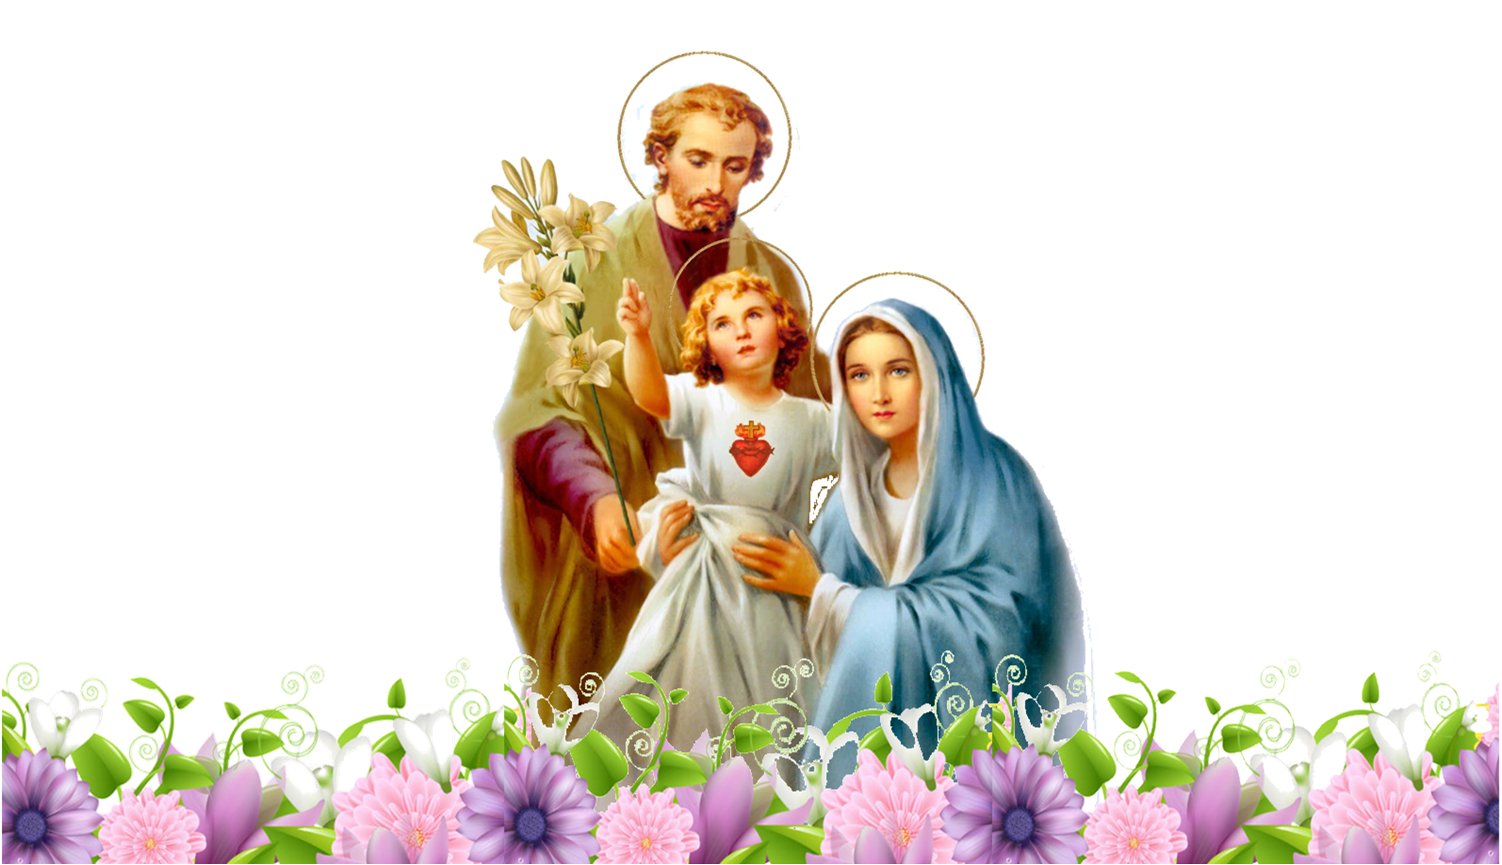 Today's Mass: Making our Families Holy like that of Jesus, Mary and Joseph.